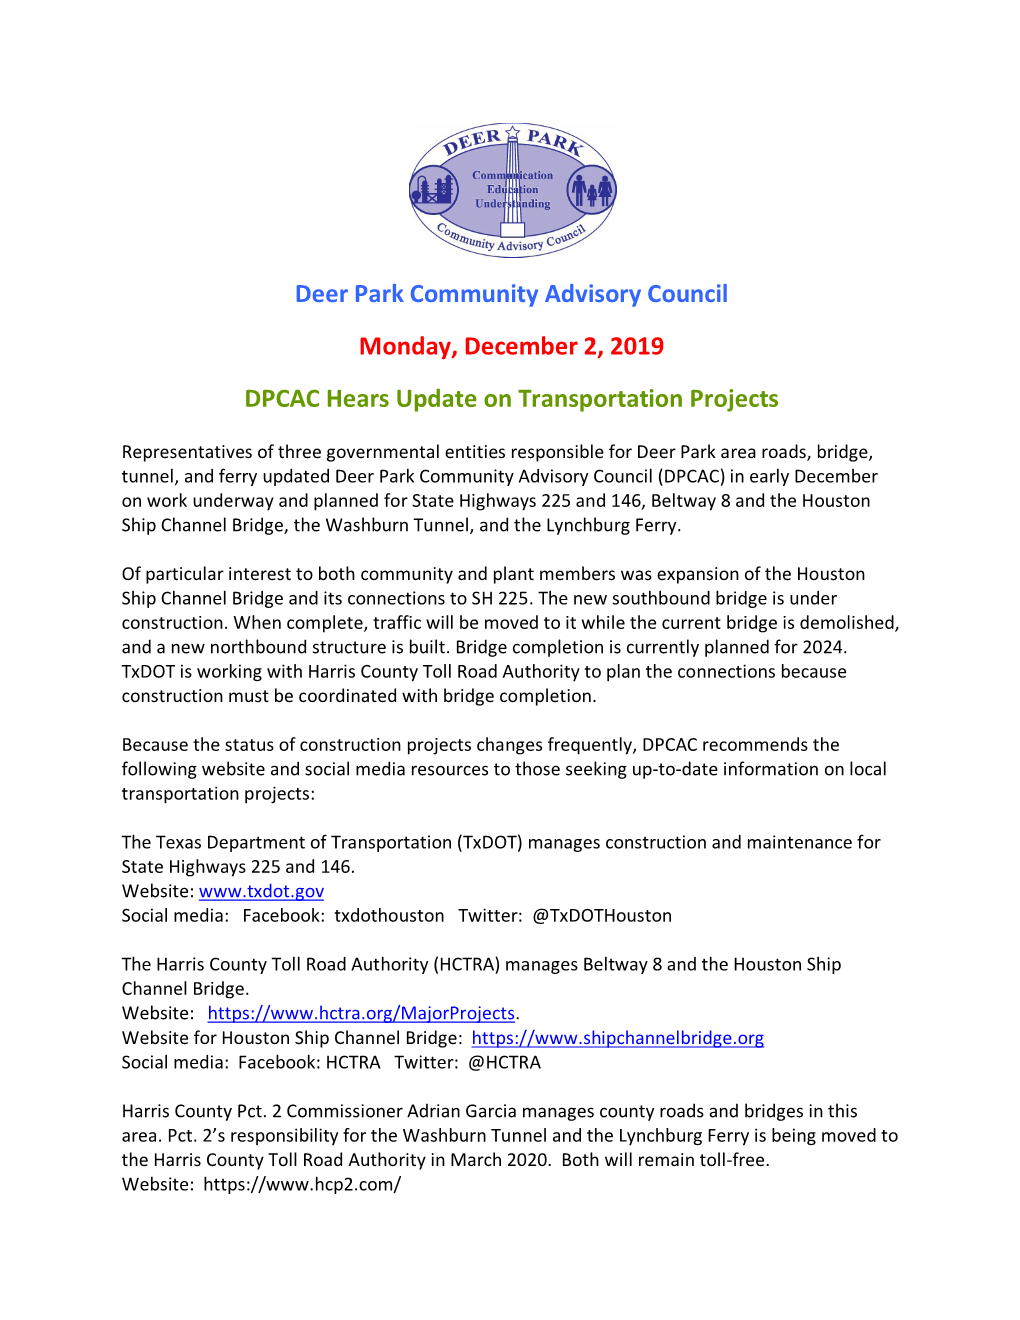 Deer Park Community Advisory Council Monday, December 2, 2019 DPCAC Hears Update on Transportation Projects